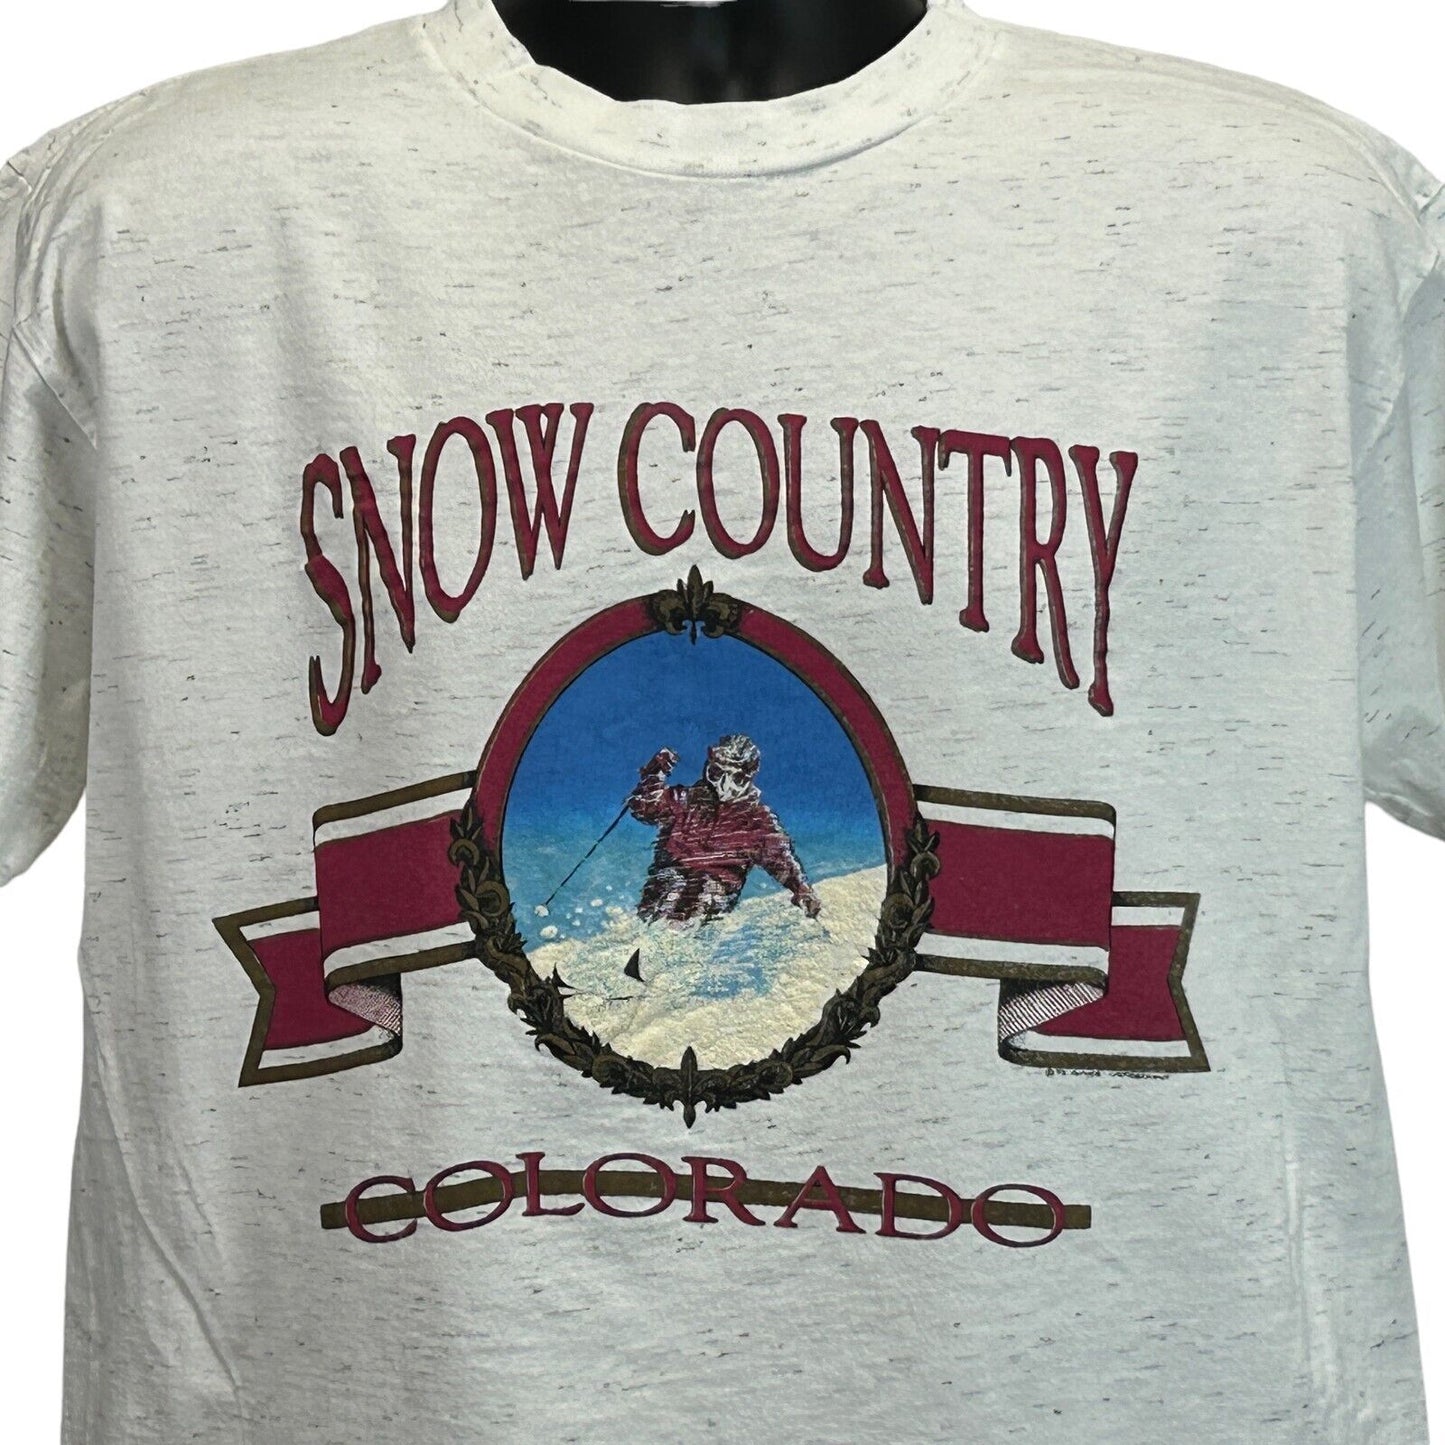 Snow Country Colorado Skiing Vintage 90s T Shirt Skier Made In USA Tee Large